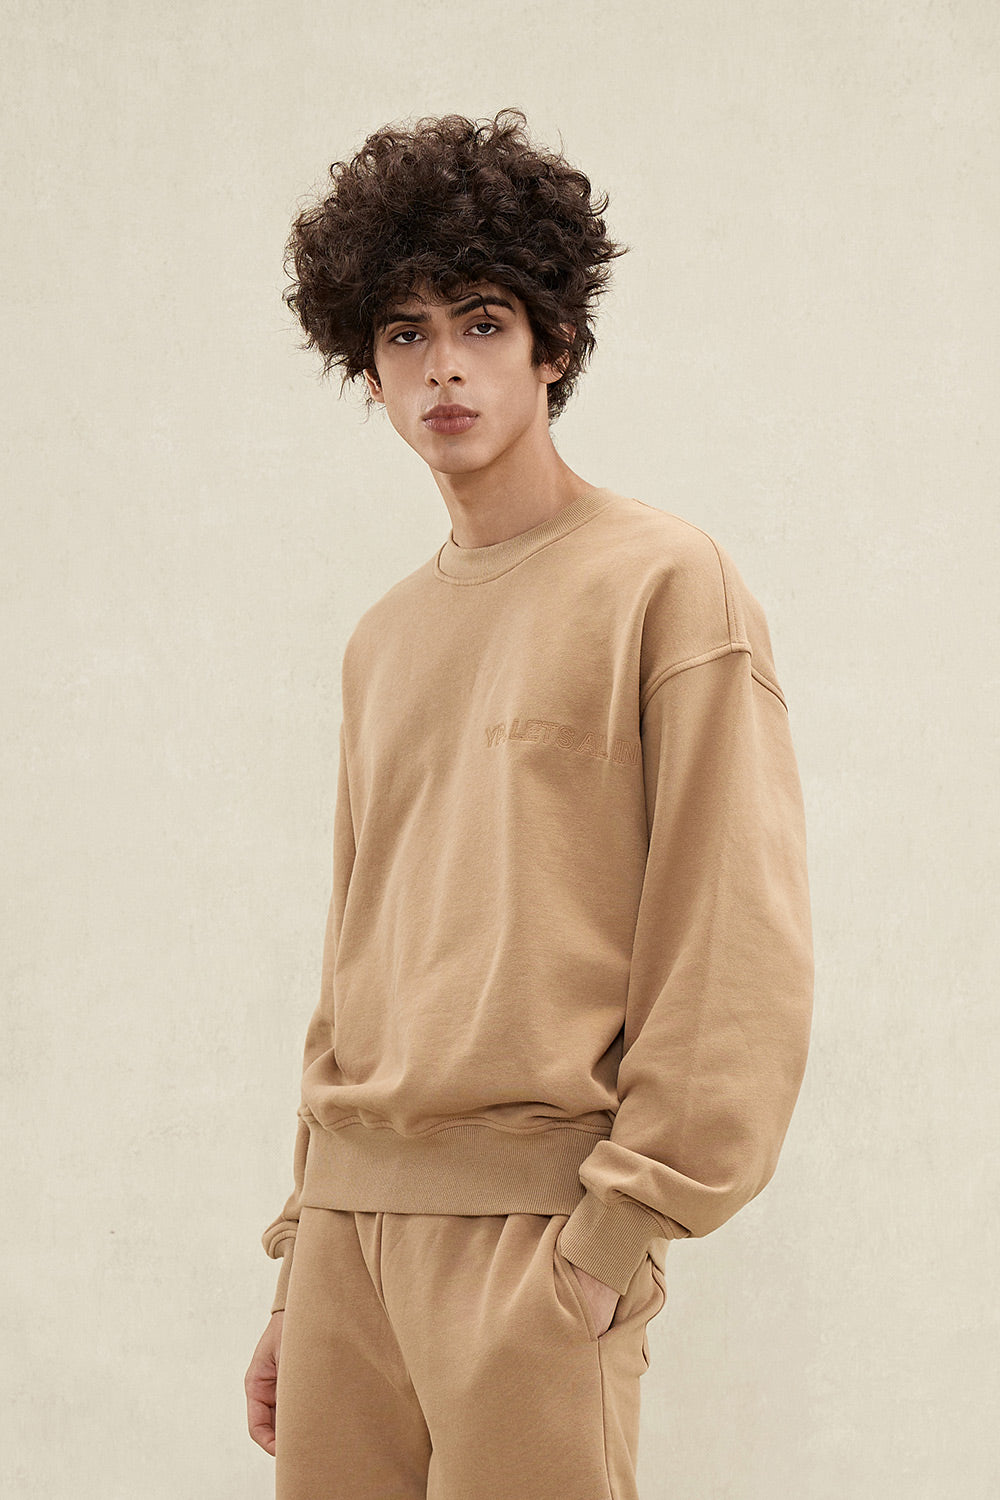 YPL Ribbed Crew Neck Pullover